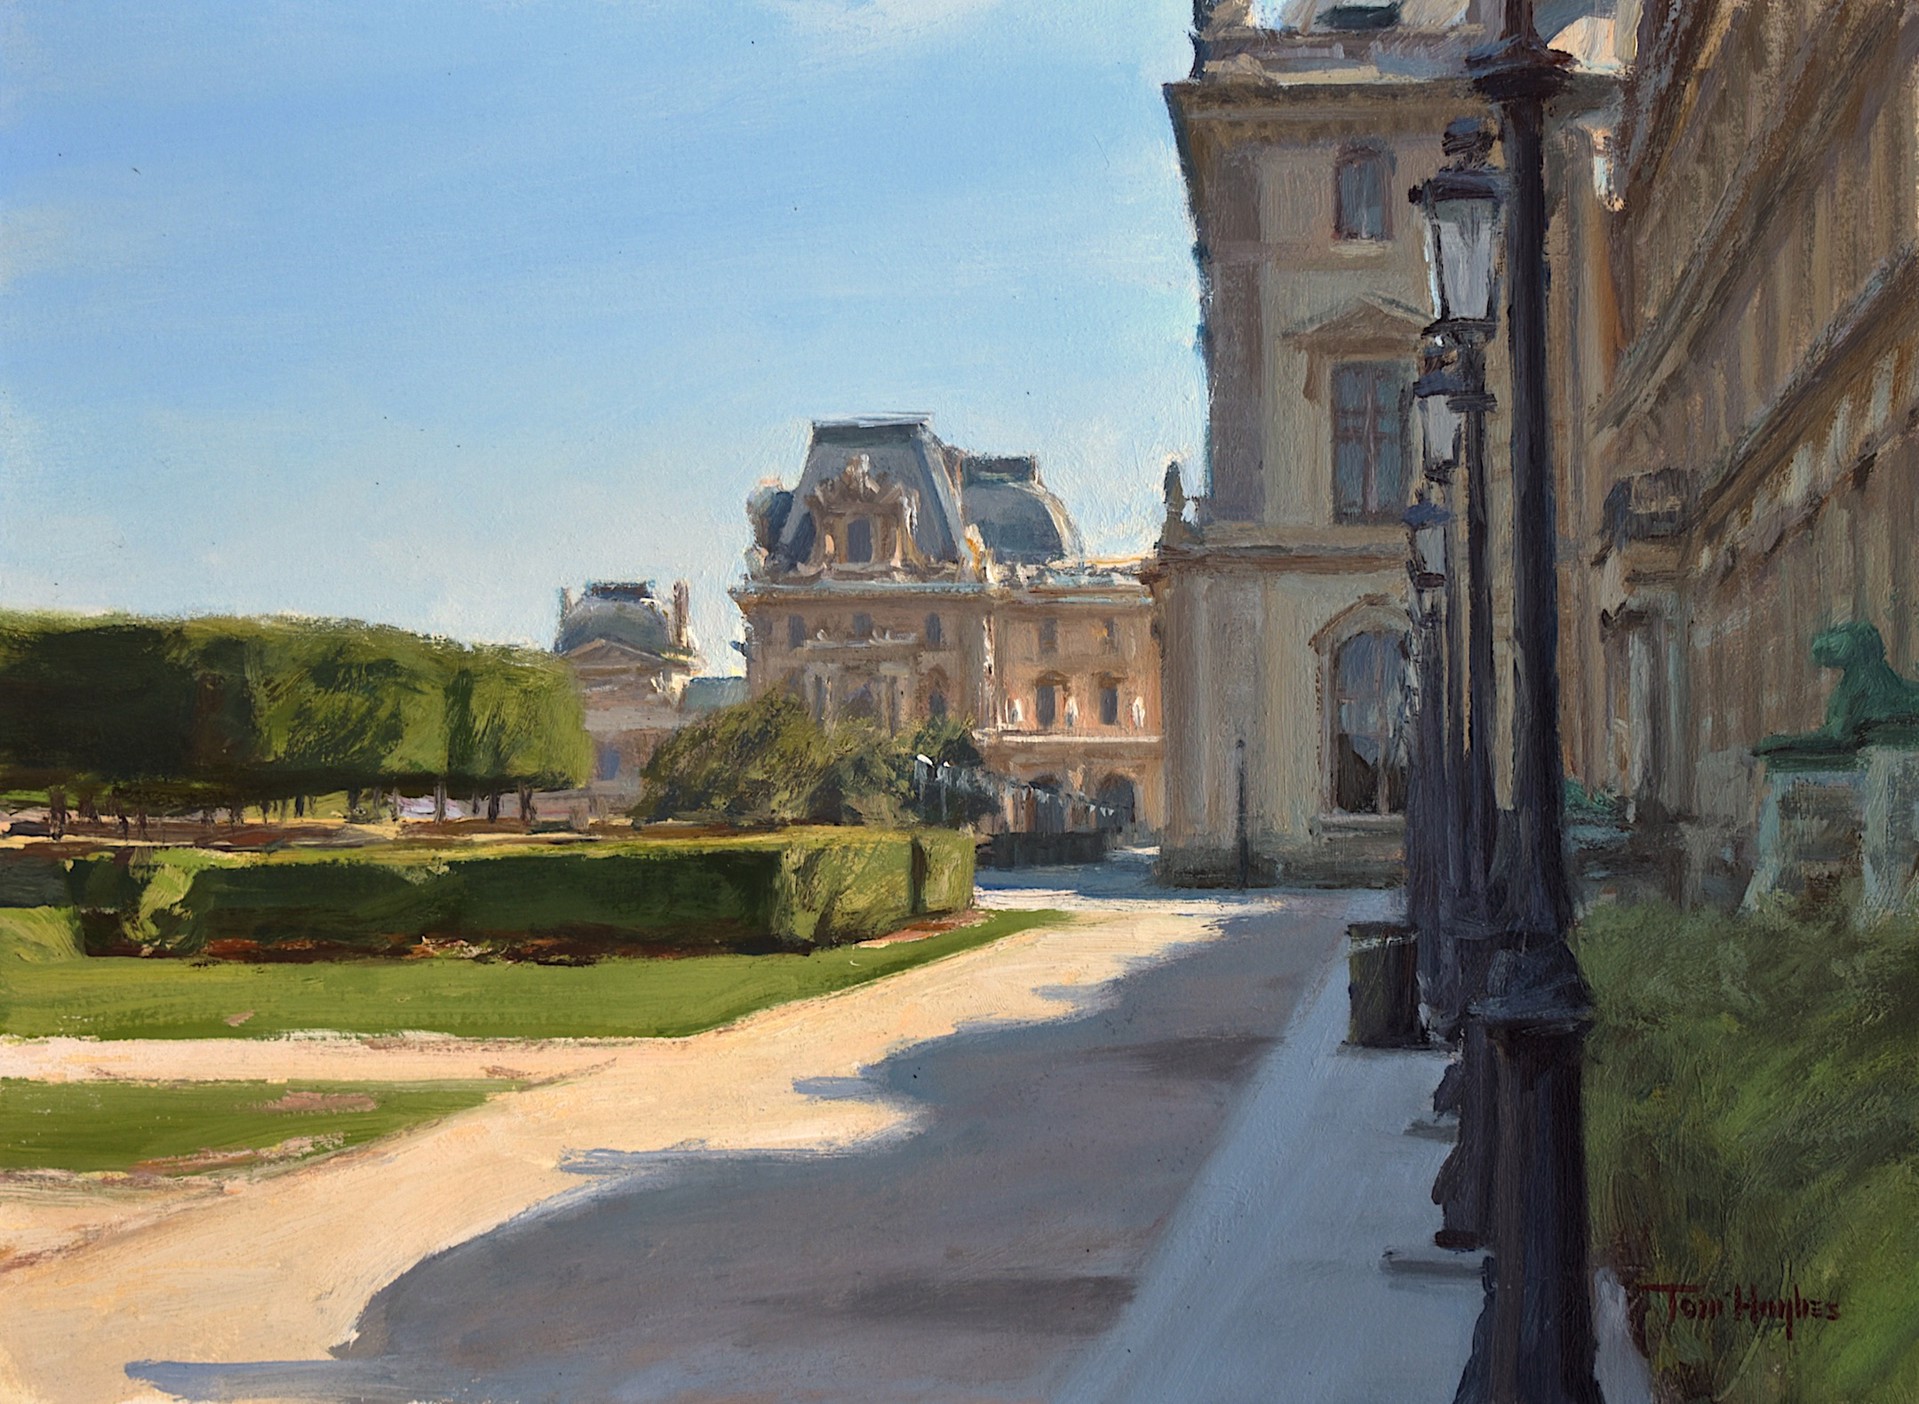 The Louvre from the Porte des Lions by Tom Hughes